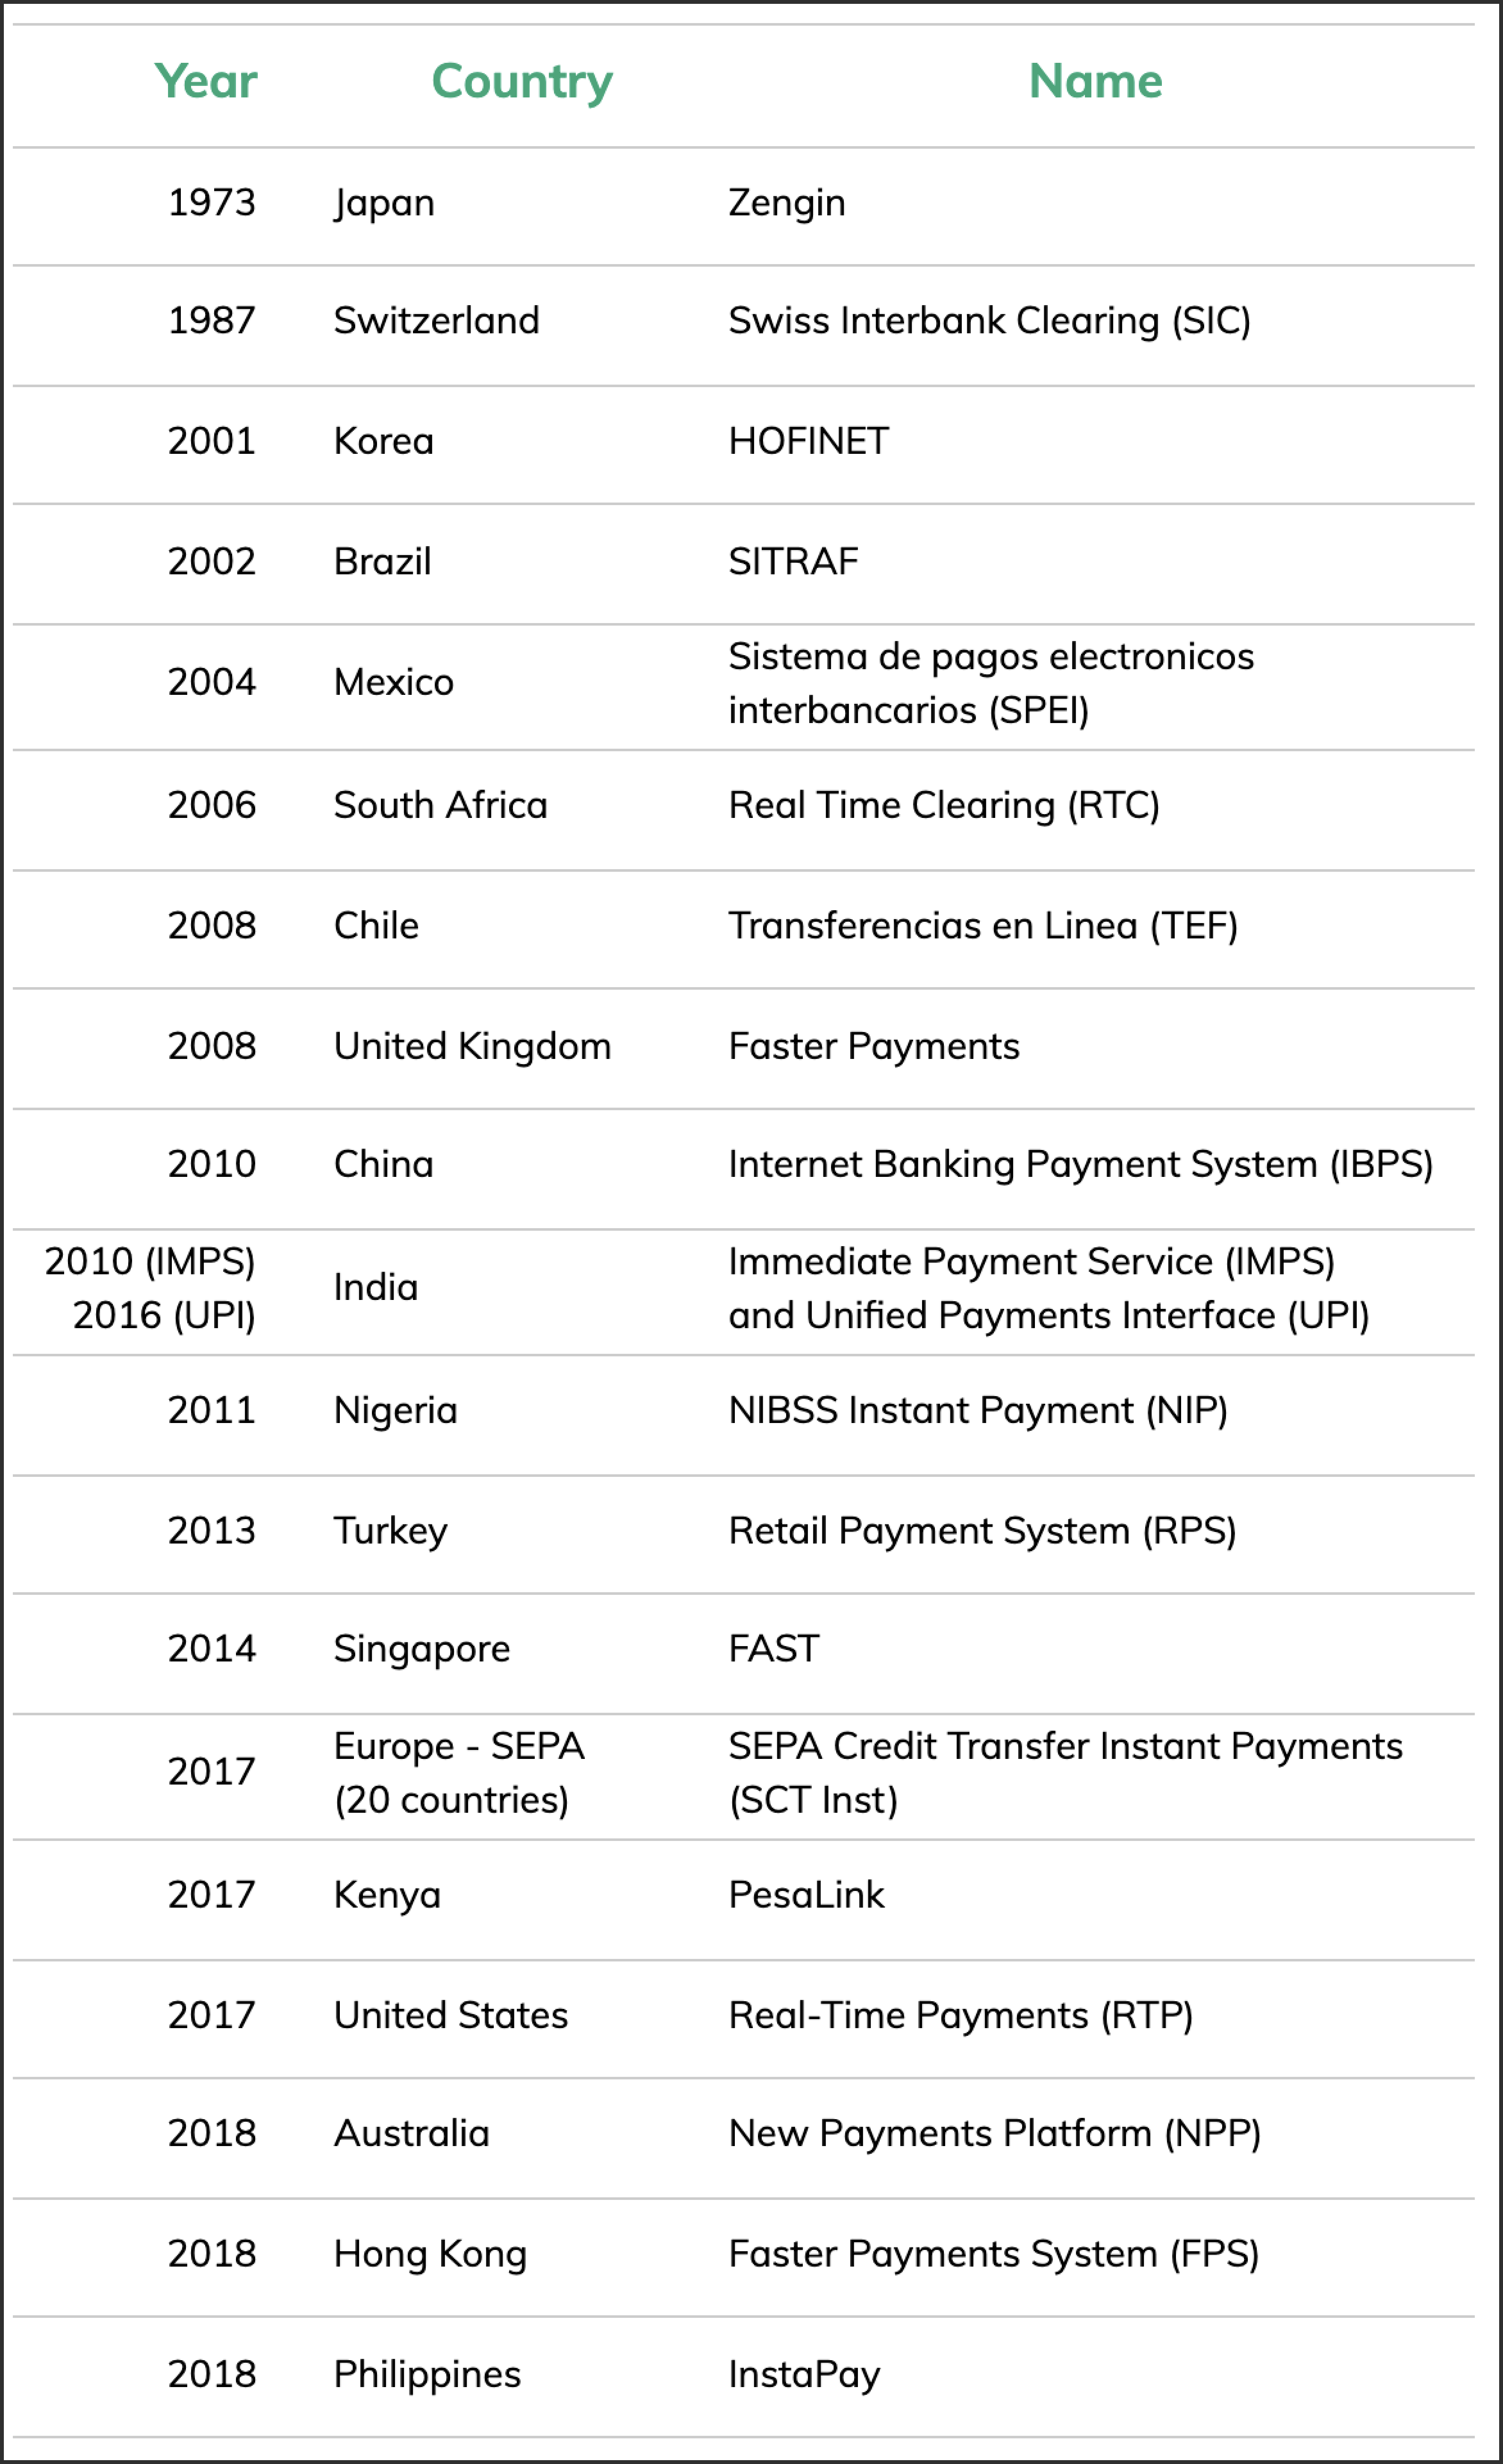 A table of countries with the name and launch year of their faster payments systems